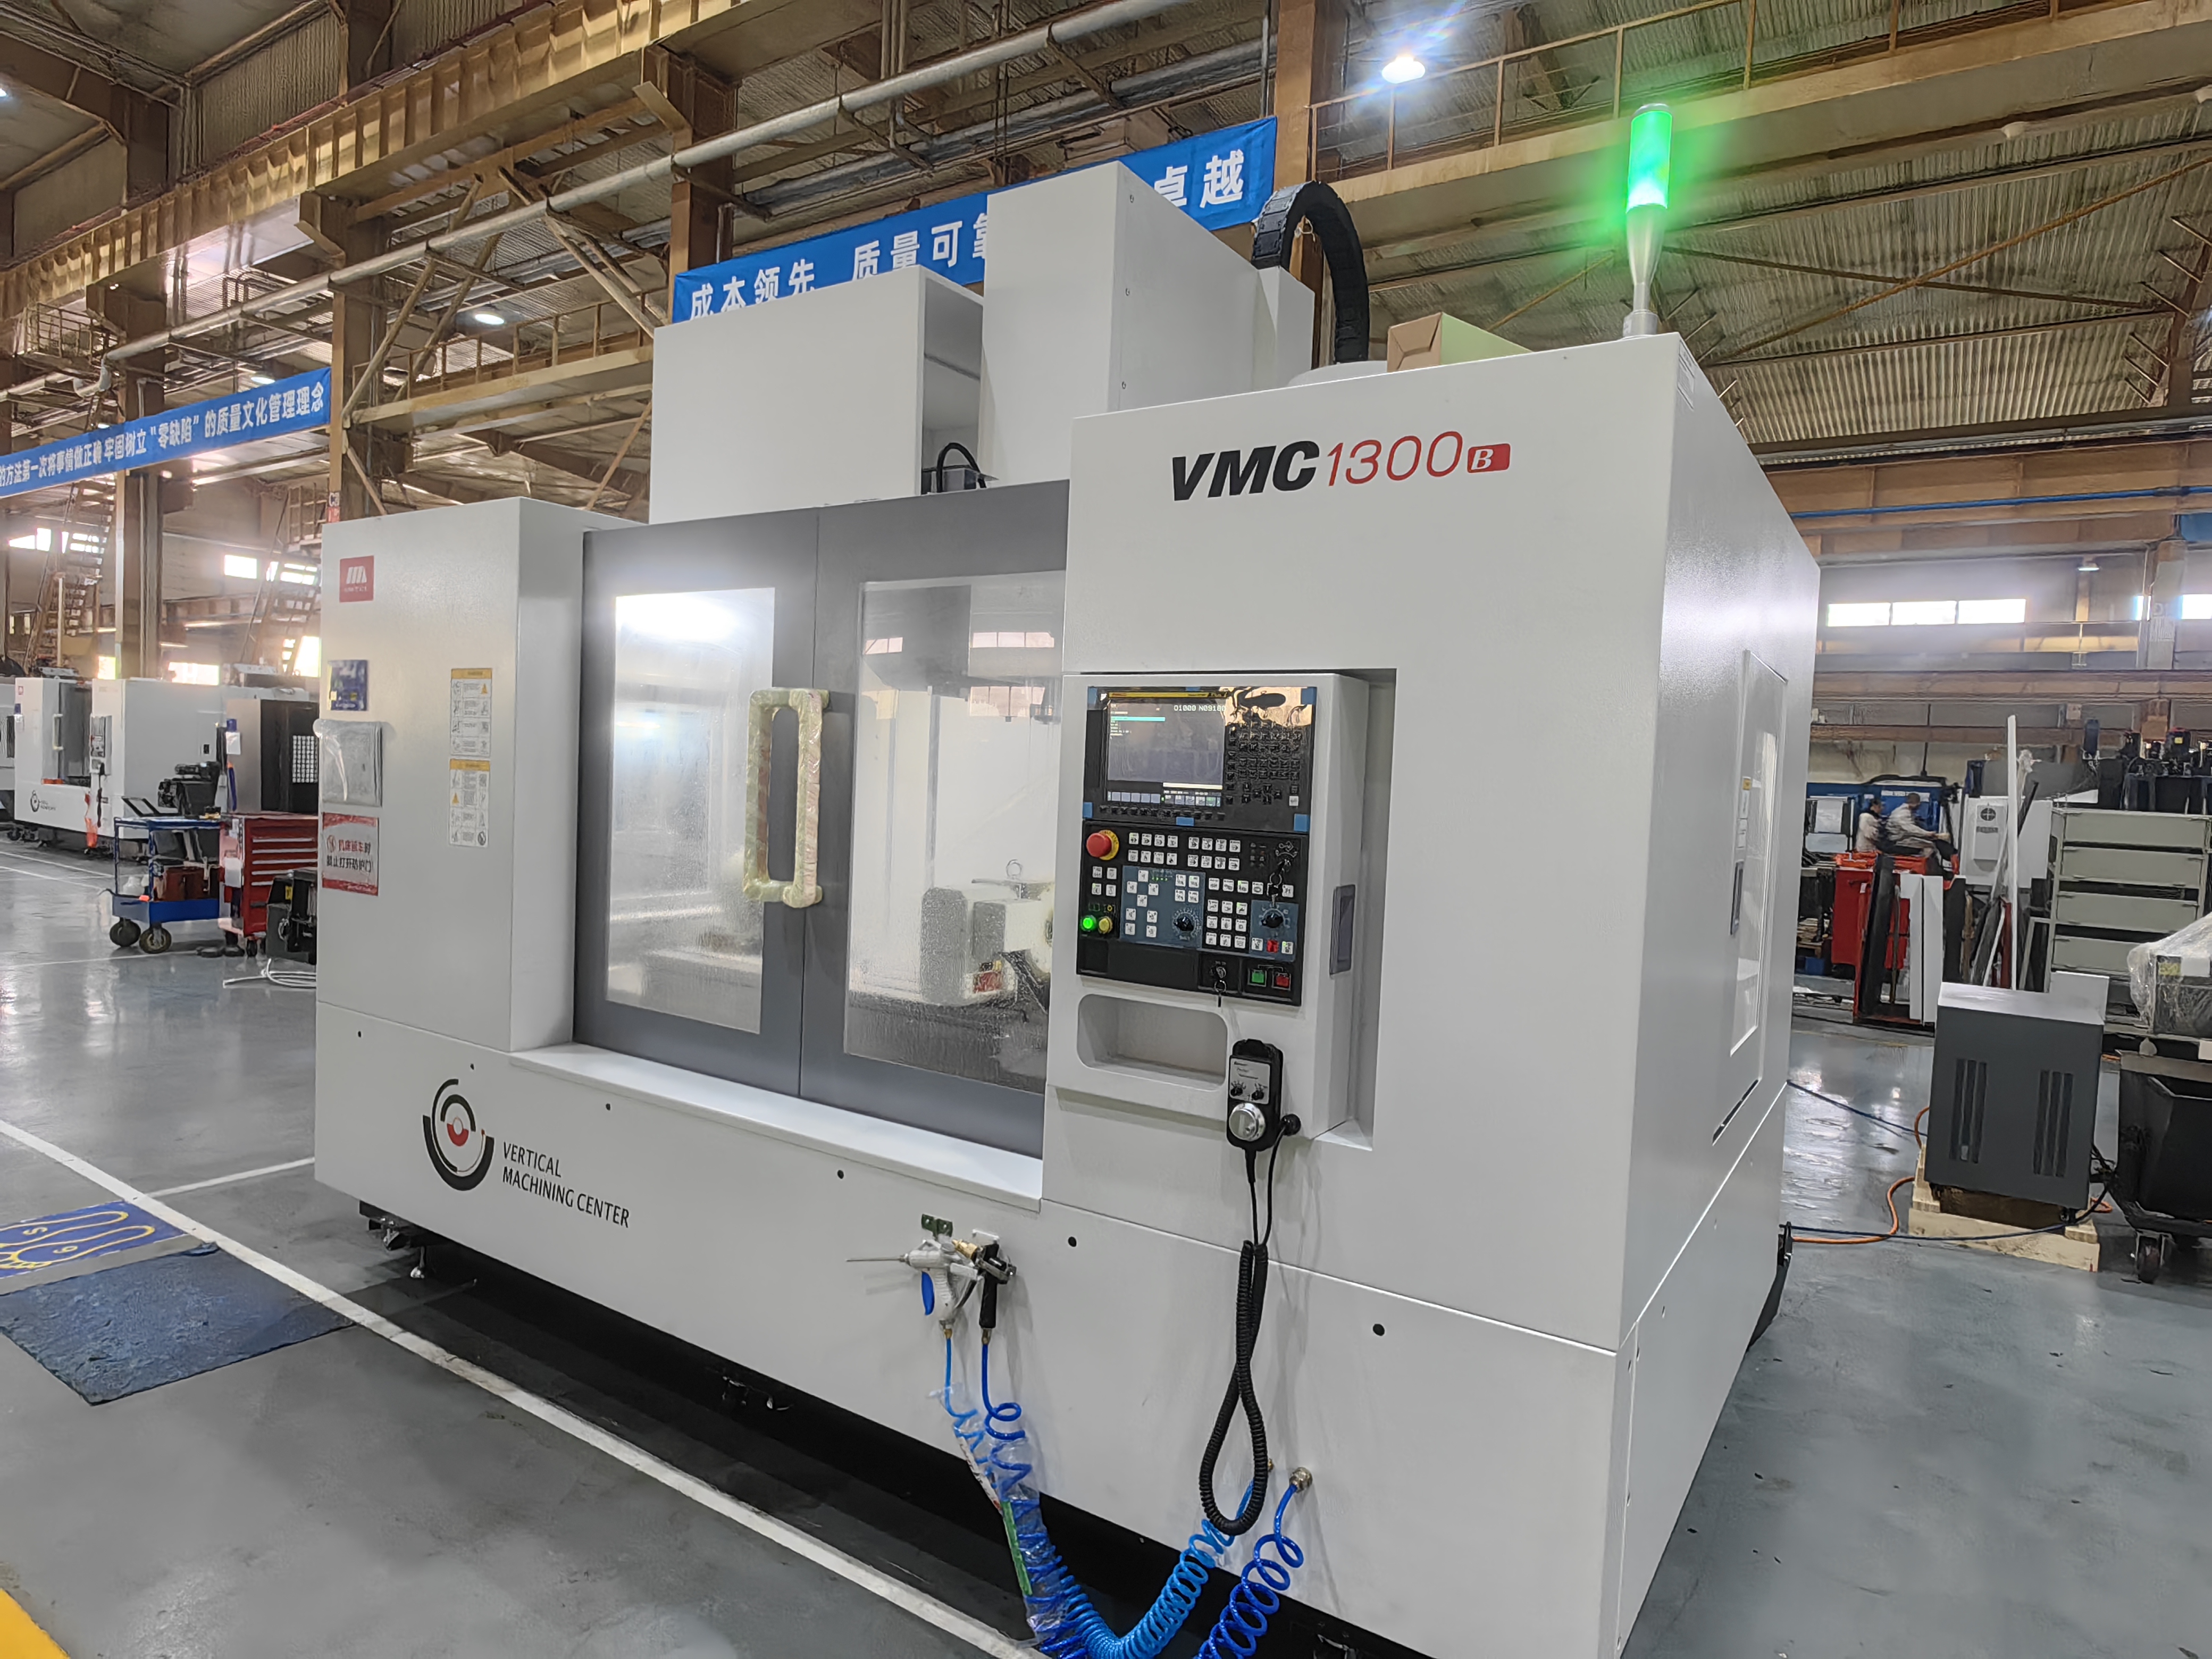 About the construction of CNC machining center analysis